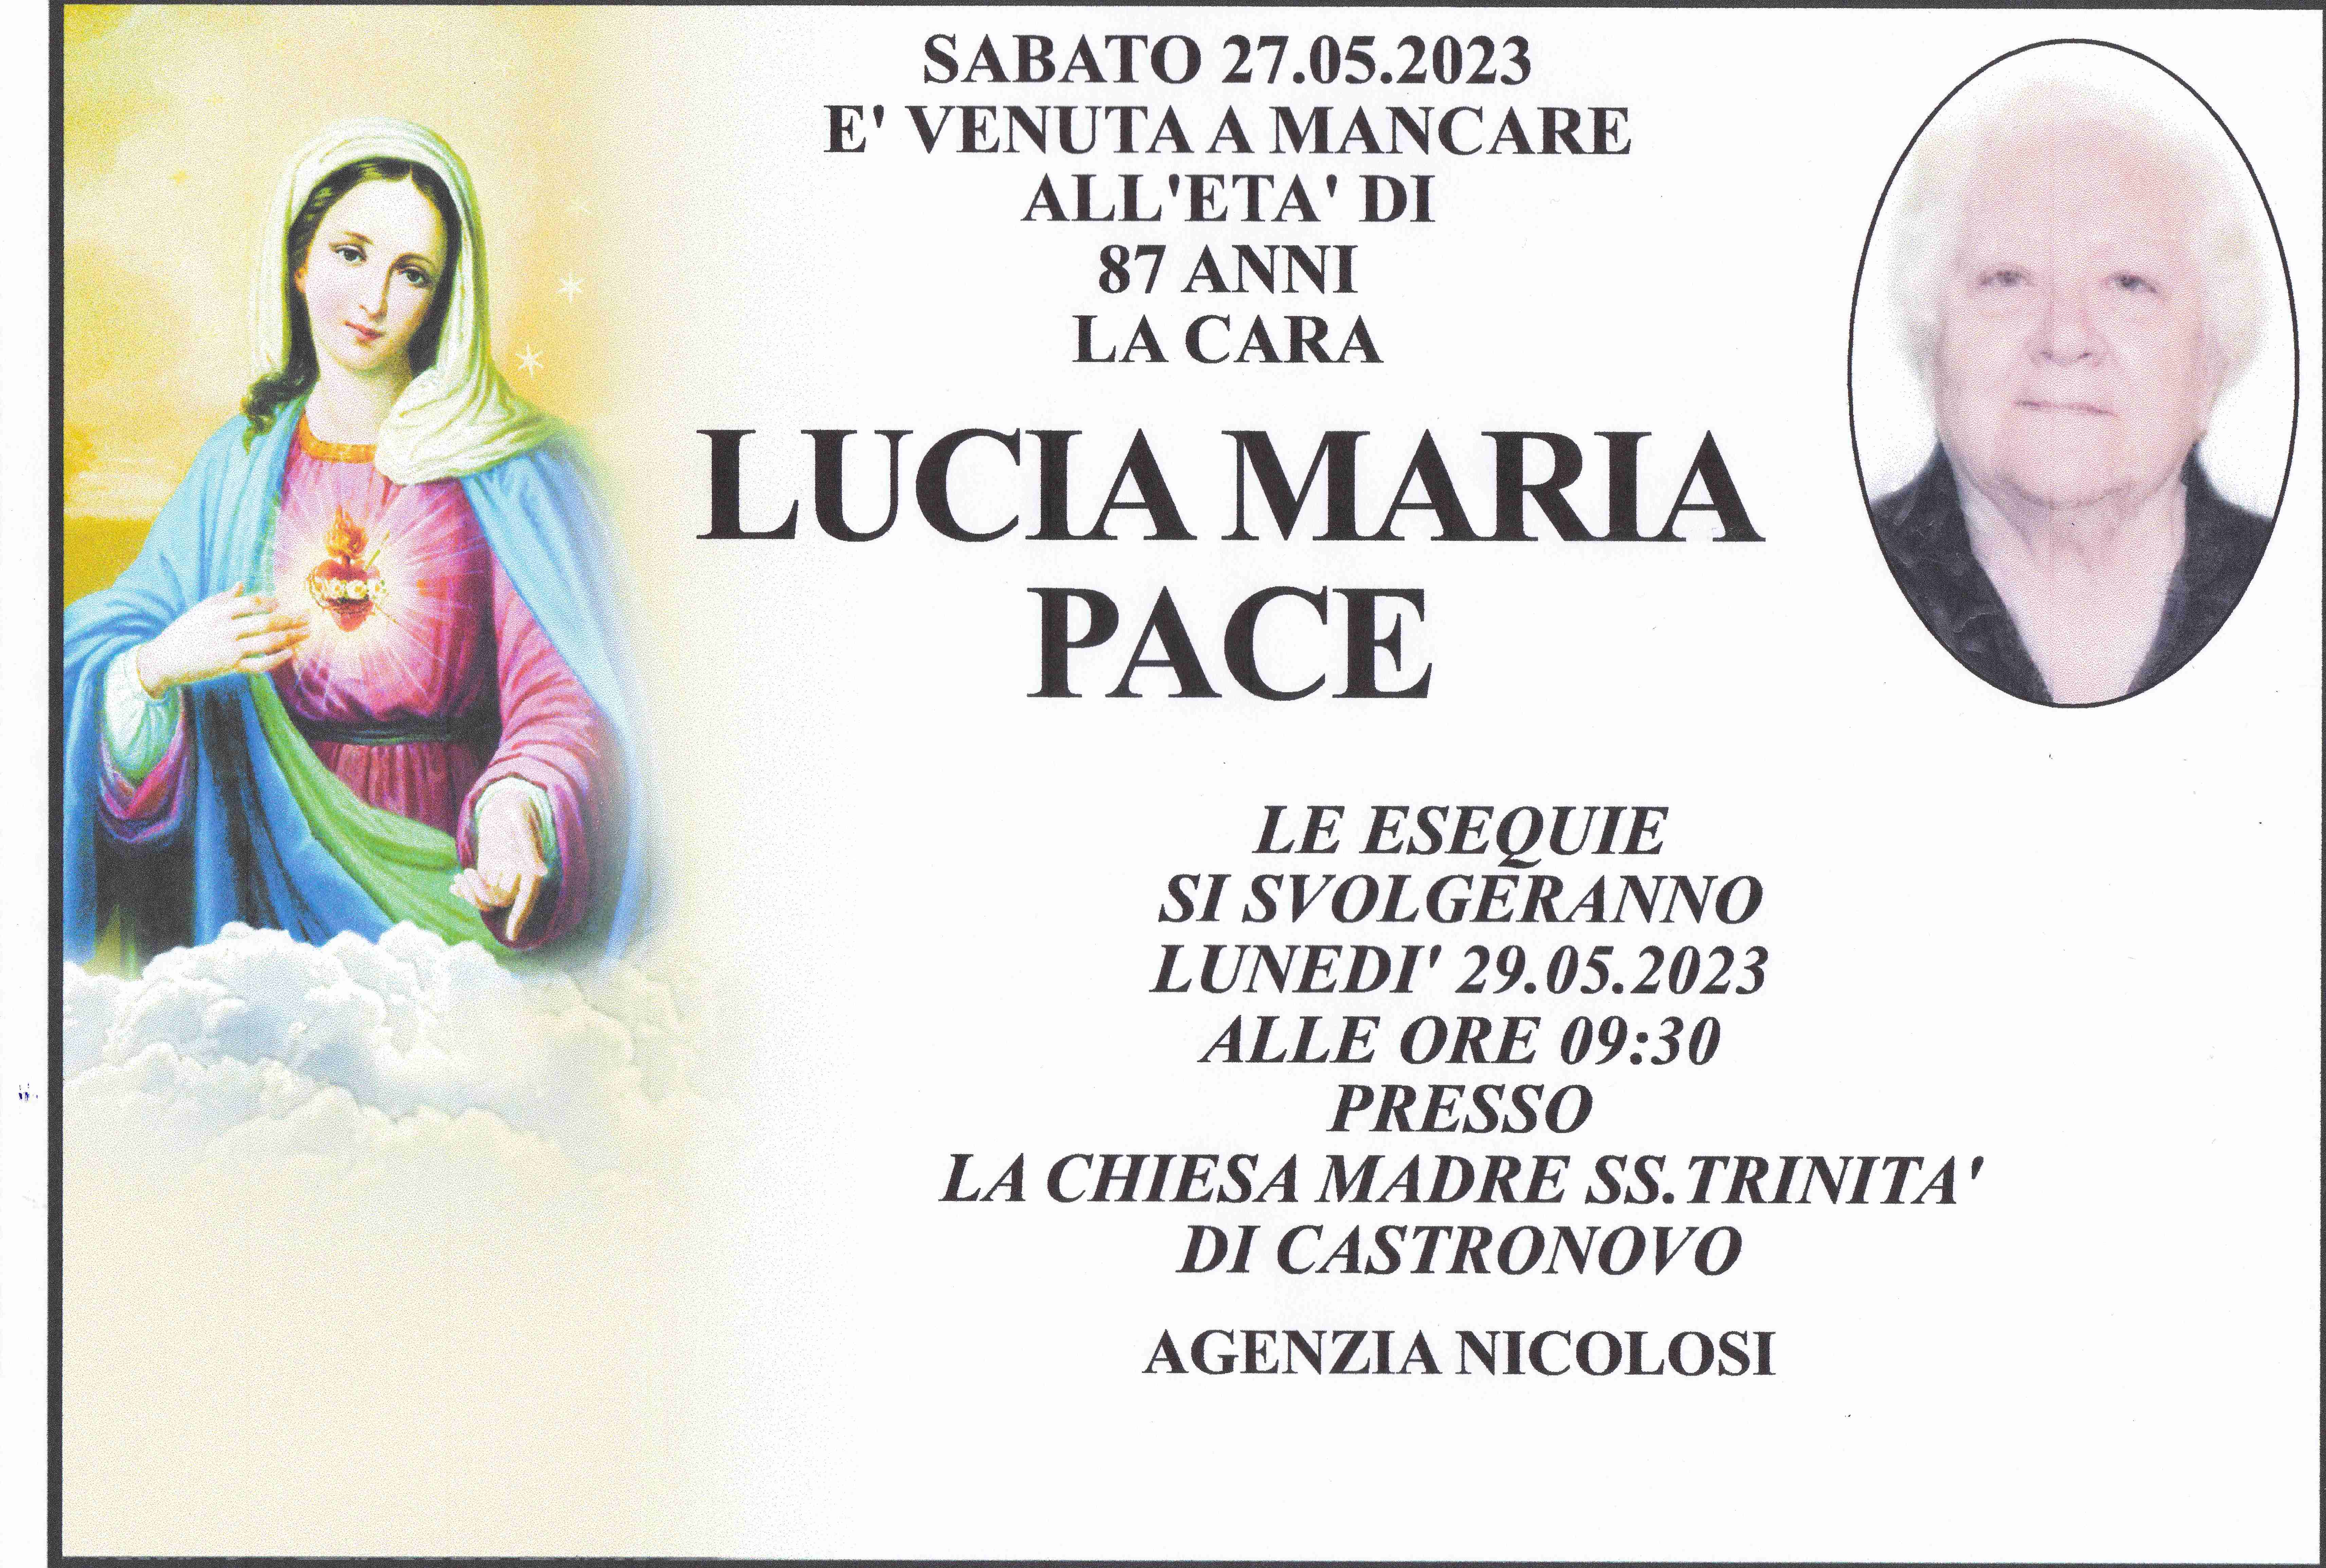 Lucia Maria Pace